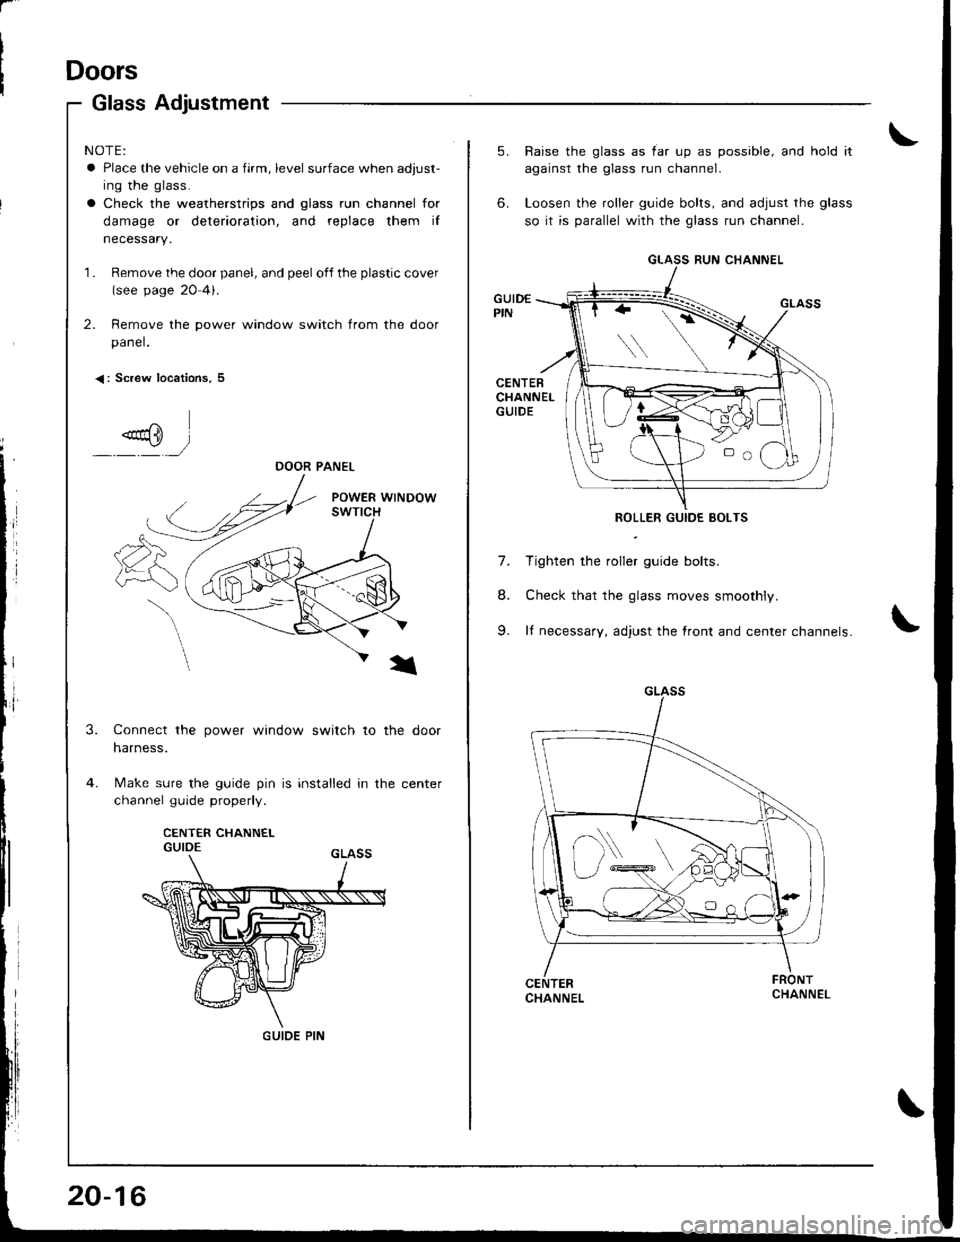 ACURA INTEGRA 1998  Service Repair Manual r
Doors
Glass Adjustment
< : Screw locations, 5
"od} l-,/
NOTE:
a Place the vehicle on a firm, level surface when adjust-
ing the glass.
a Check the weatherstrips and glass run channel for
damage or d